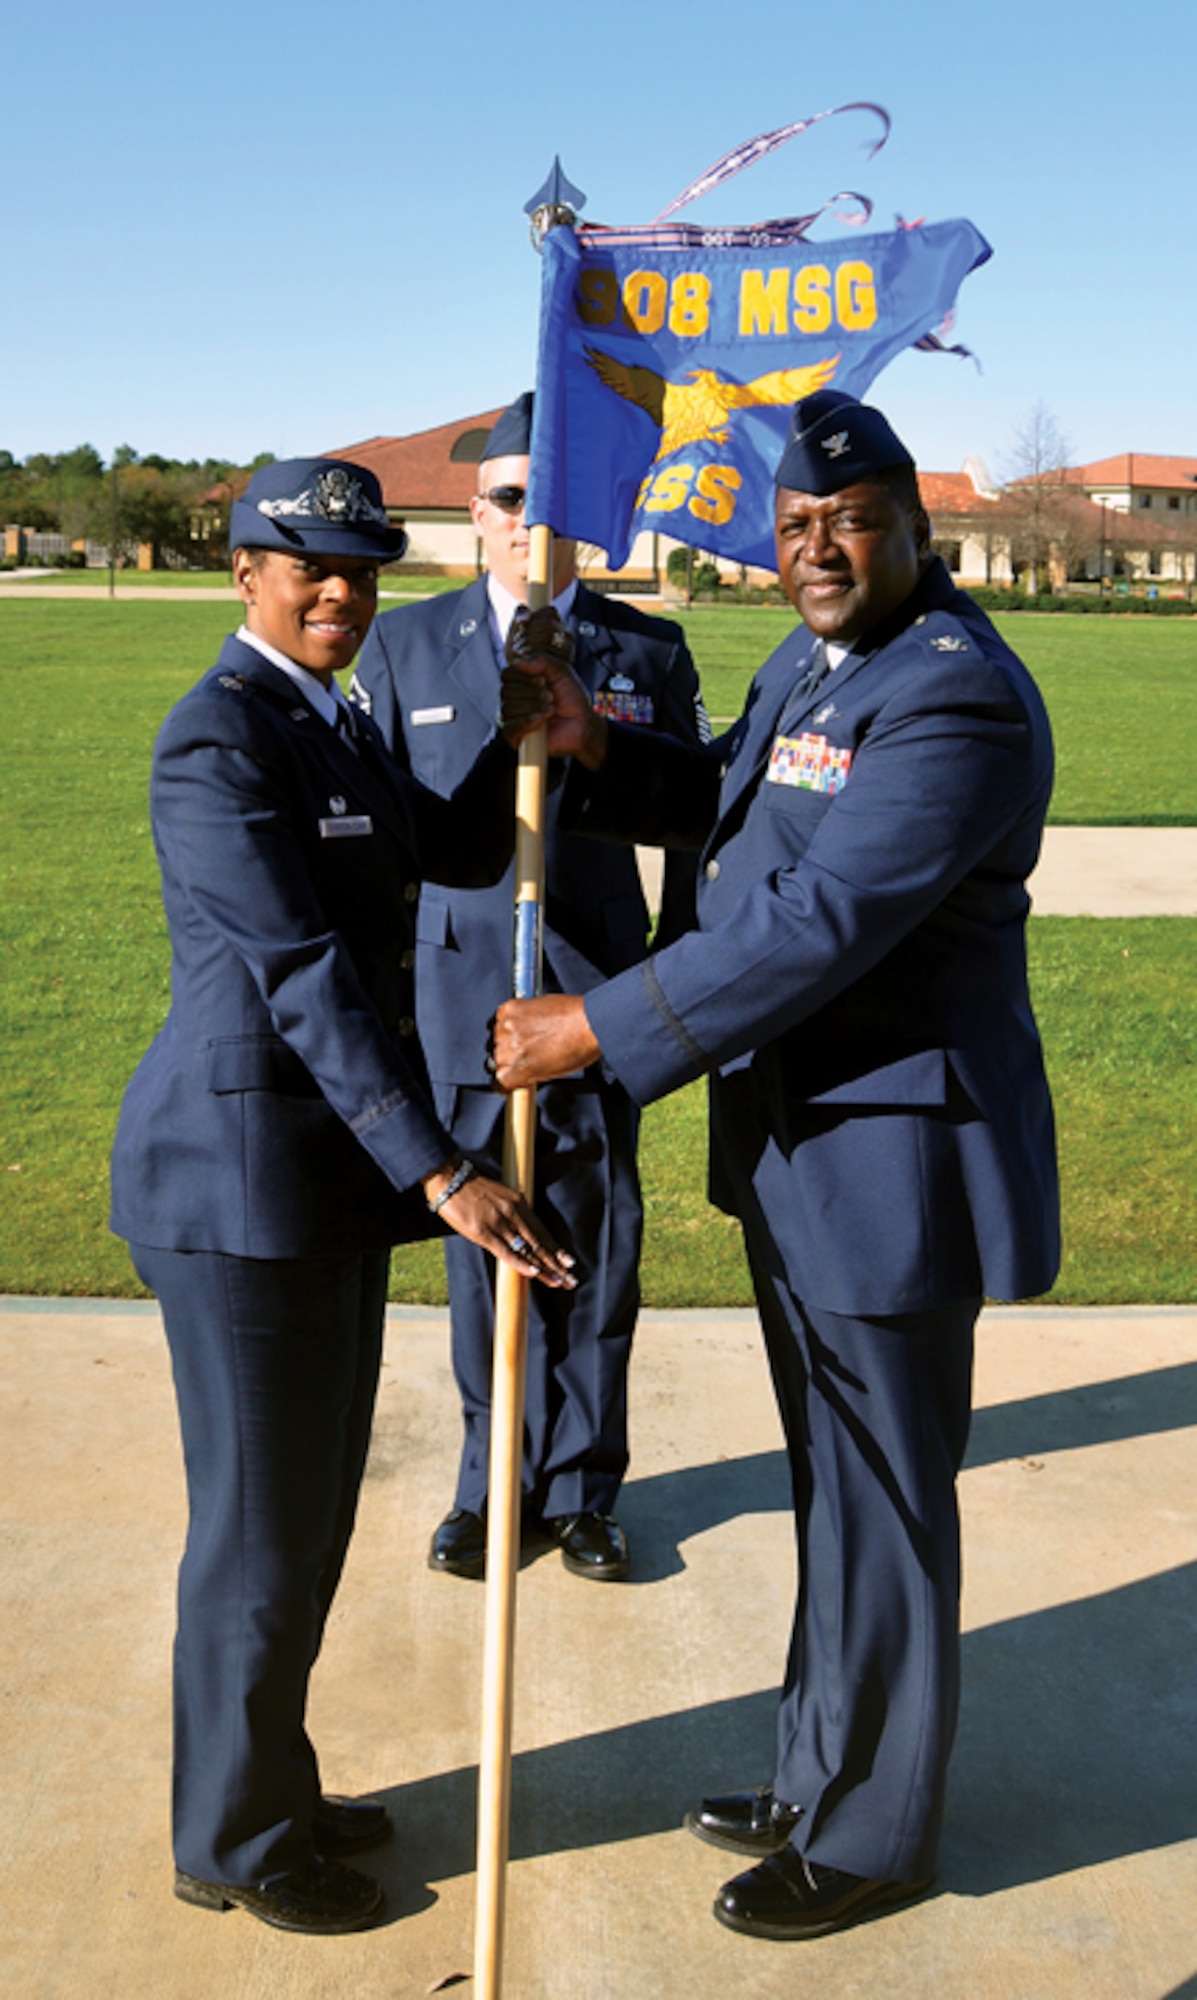 Lieutenant Colonel Constance Johnson-Cage recently assumed command of the 908th Force Support Squadron. Here', she accepts the squadron guidon from 908th Mission Support Group Commander Col. Pete Peterson. (Air Force photo by Tech. Sgt. Jay Ponder)